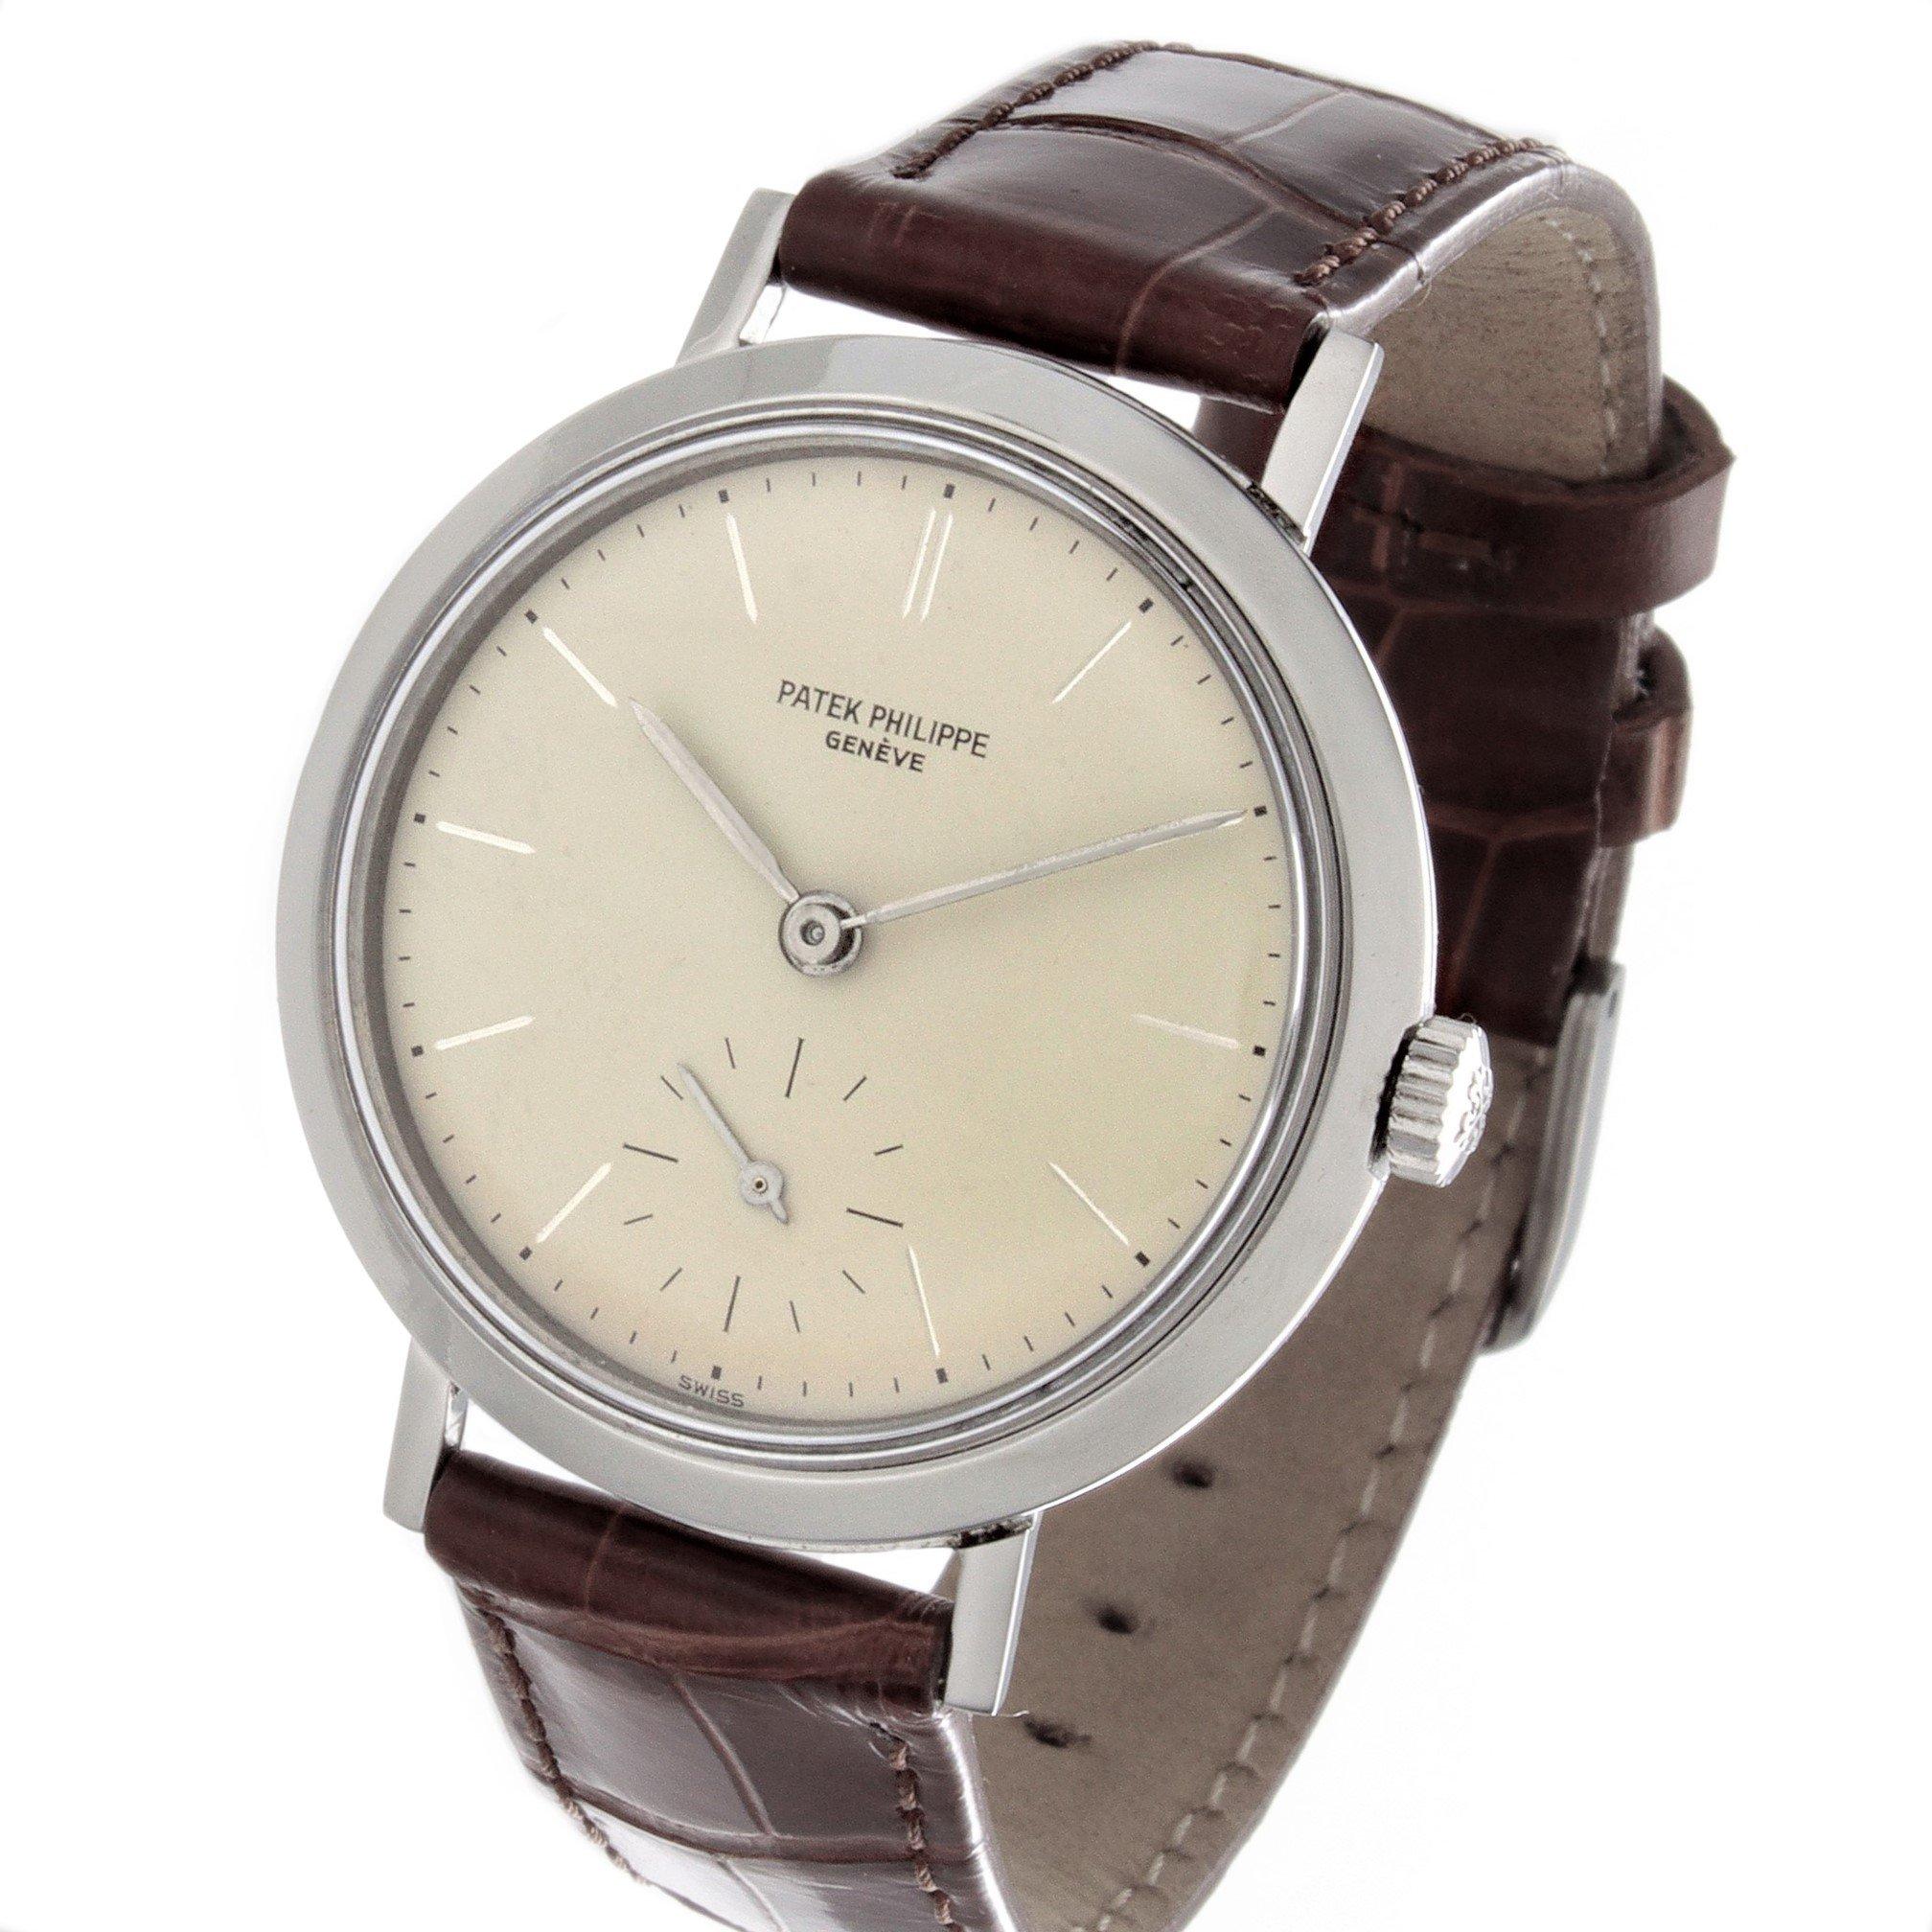 Patek Philippe 3419A Stainless Steel Calatrava Watch In Excellent Condition For Sale In Santa Monica, CA